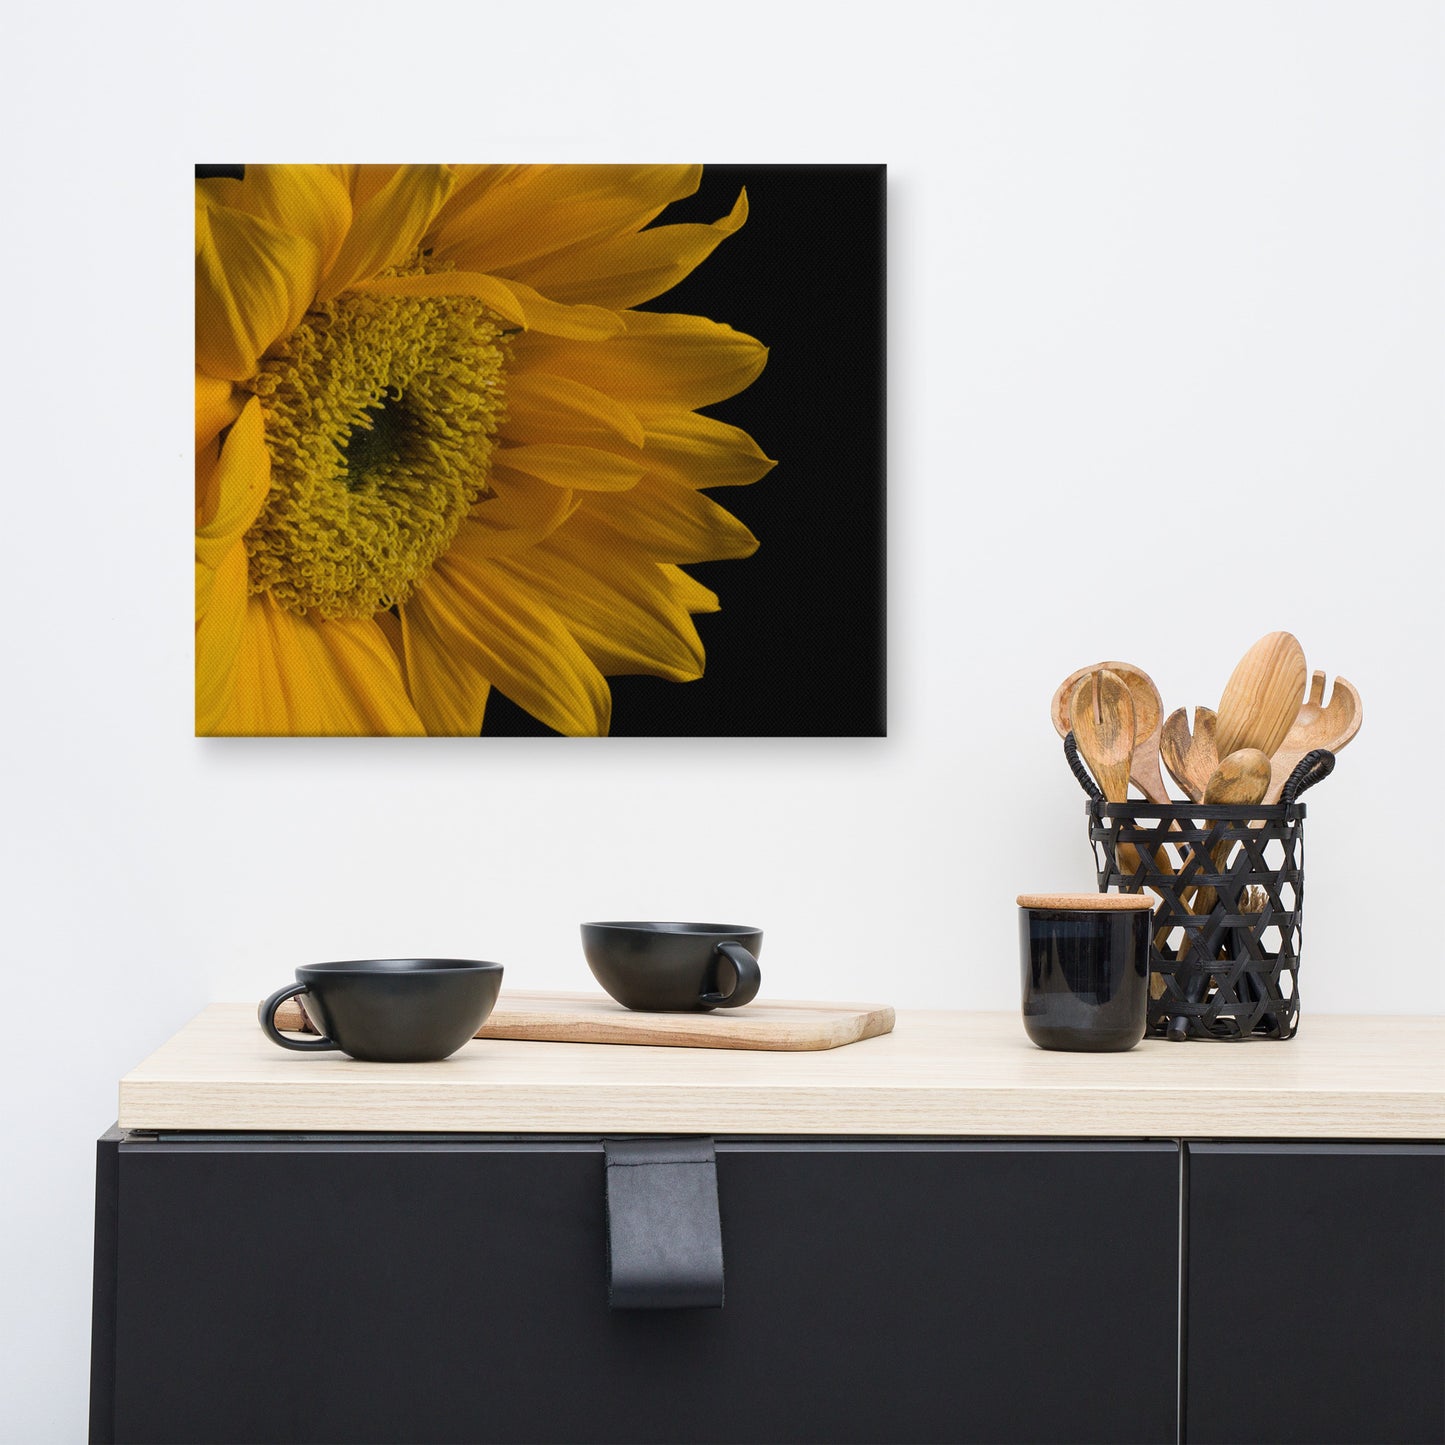 Sunflower from Left Floral Nature Canvas Wall Art Prints